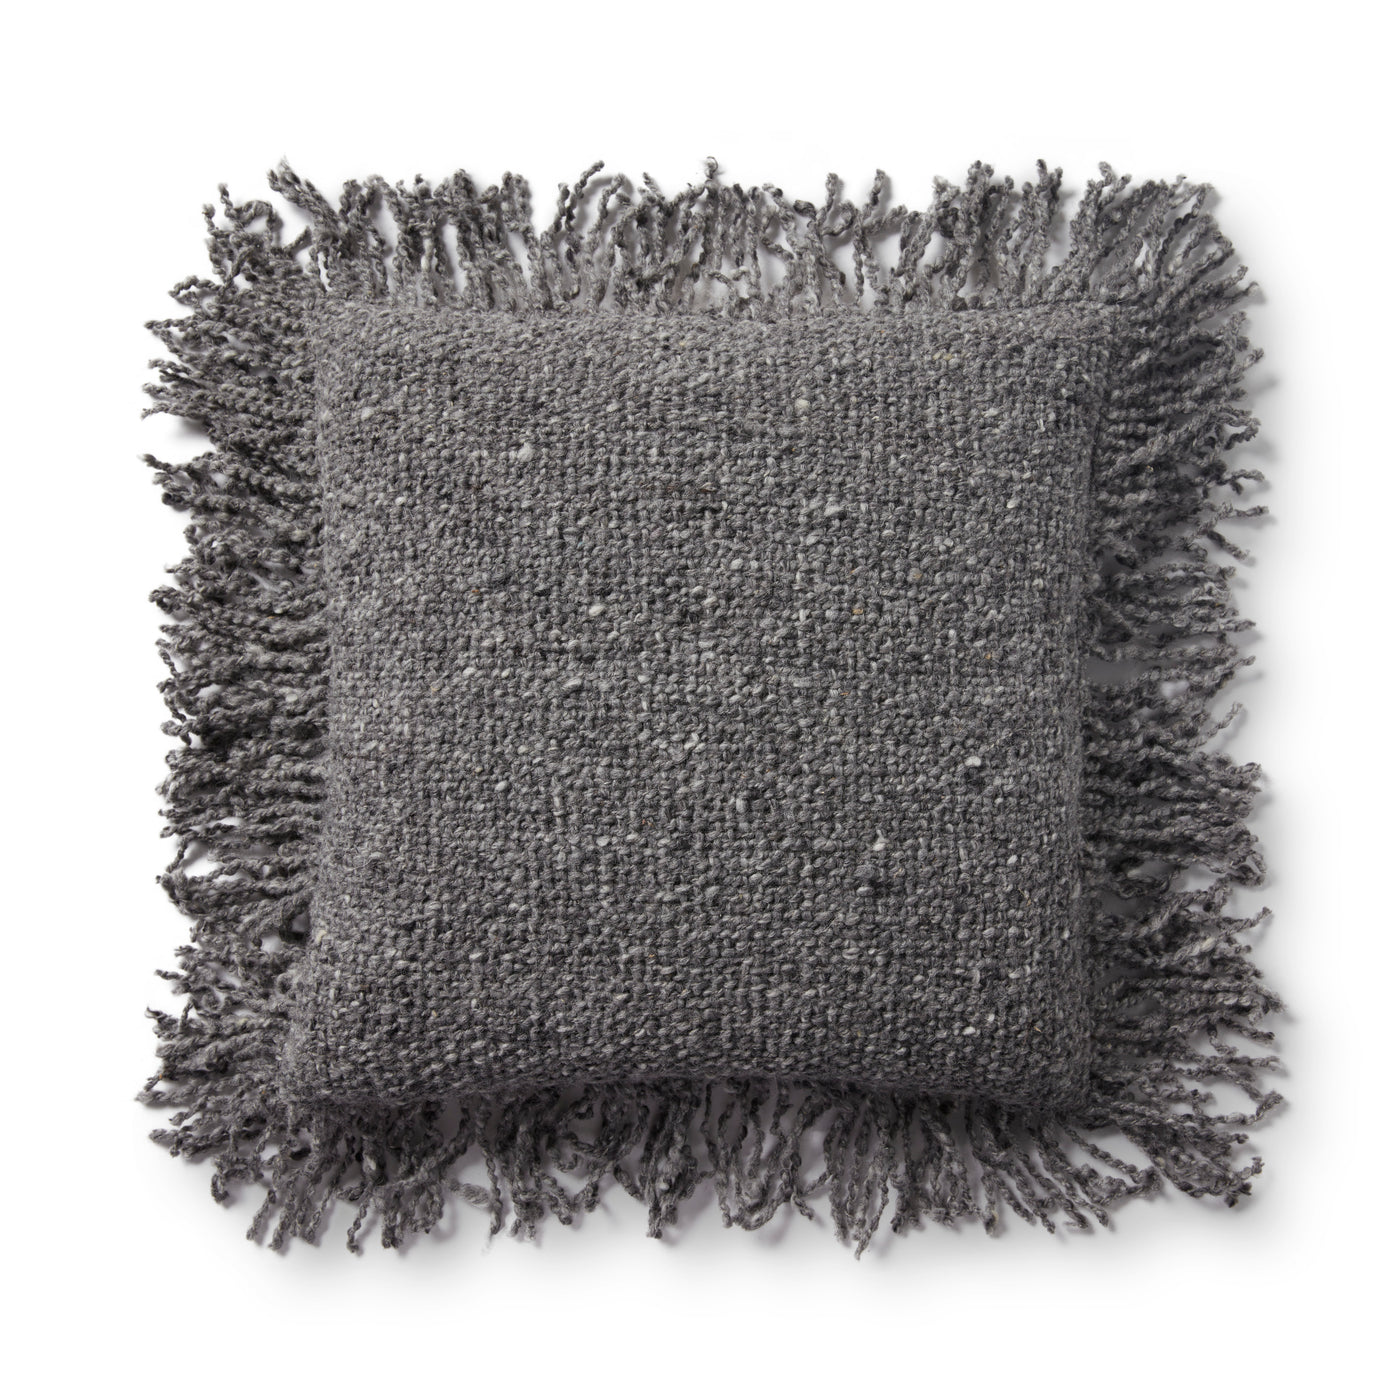 Pll0033 Charcoal Pillow